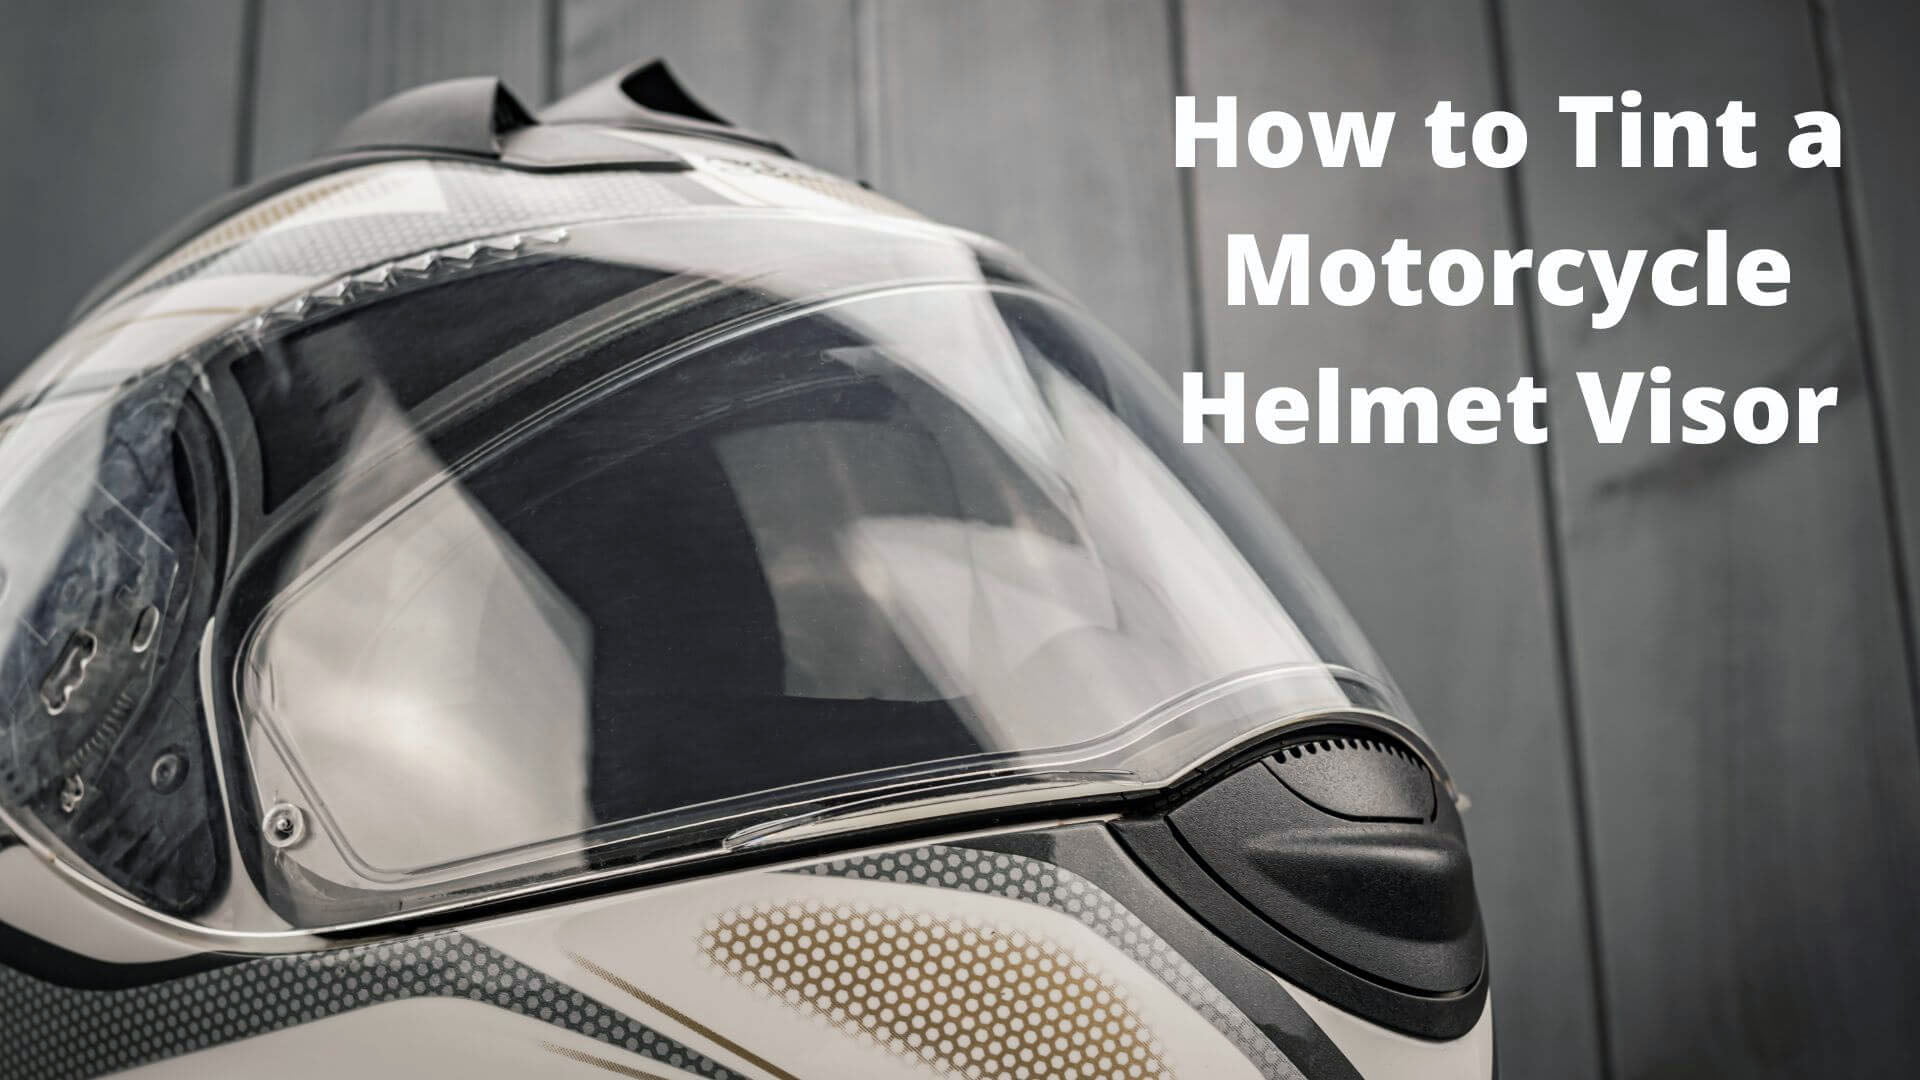 How to Tint a Motorcycle Helmet Visor